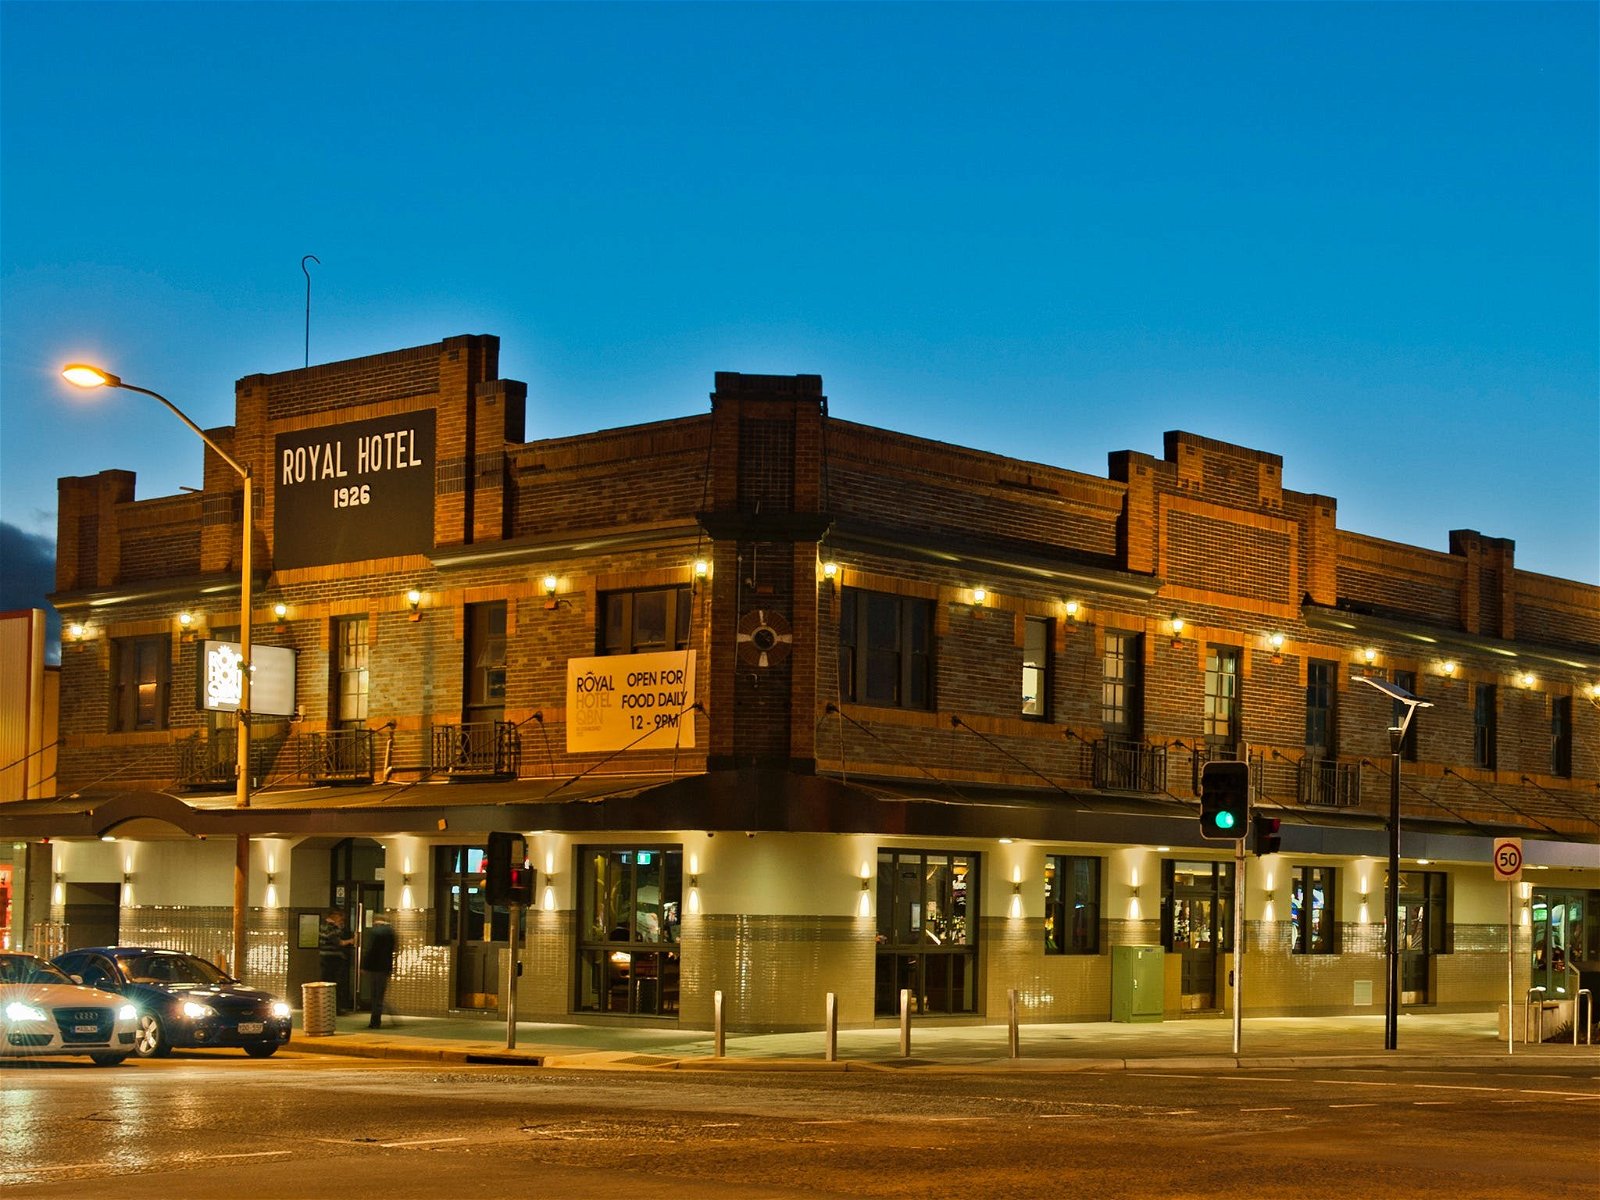 Royal Hotel Queanbeyan - Food Delivery Shop